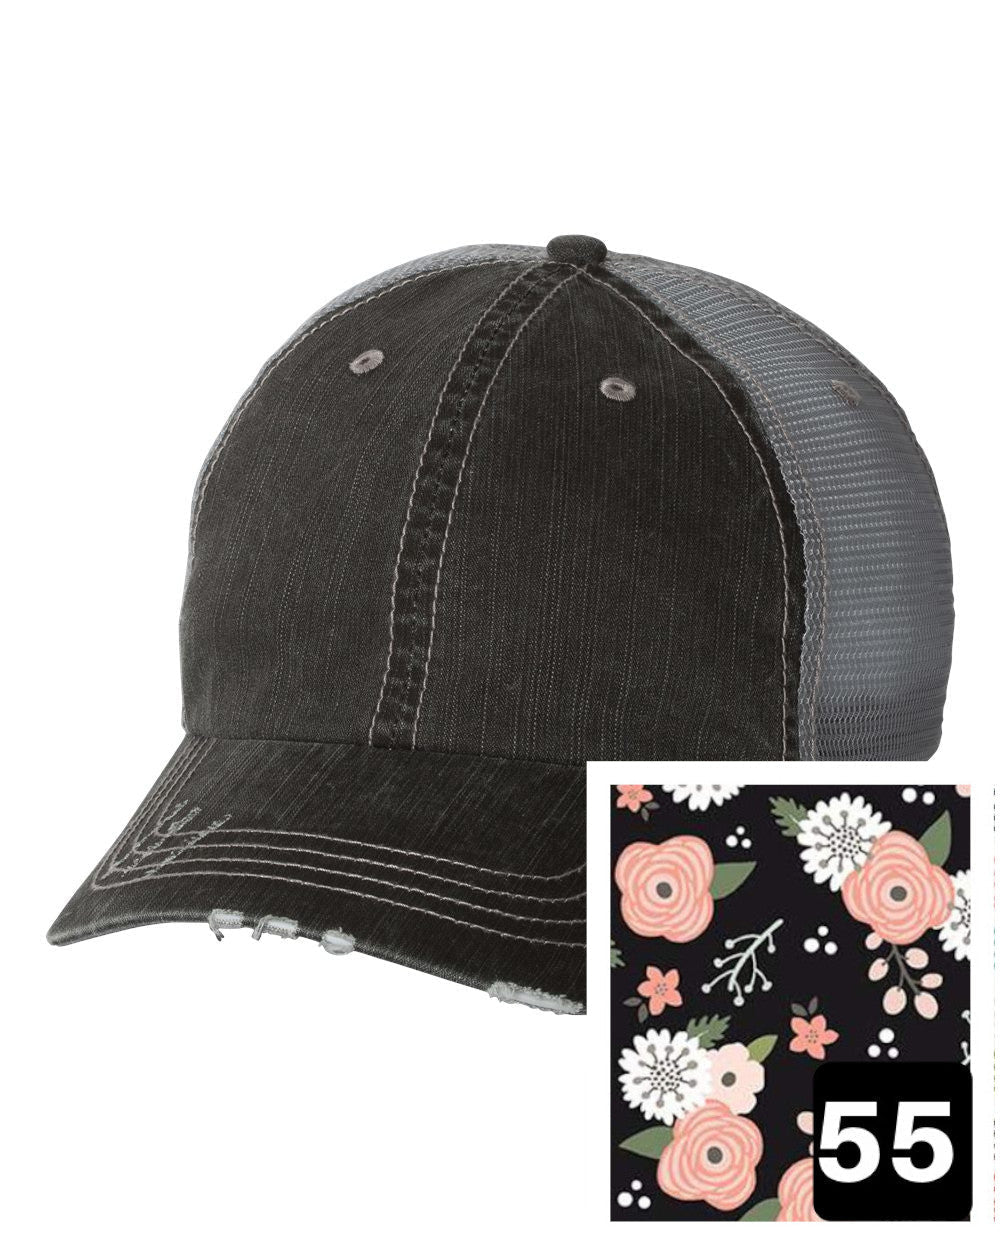 gray distressed trucker hat with petite floral on navy fabric state of Texas